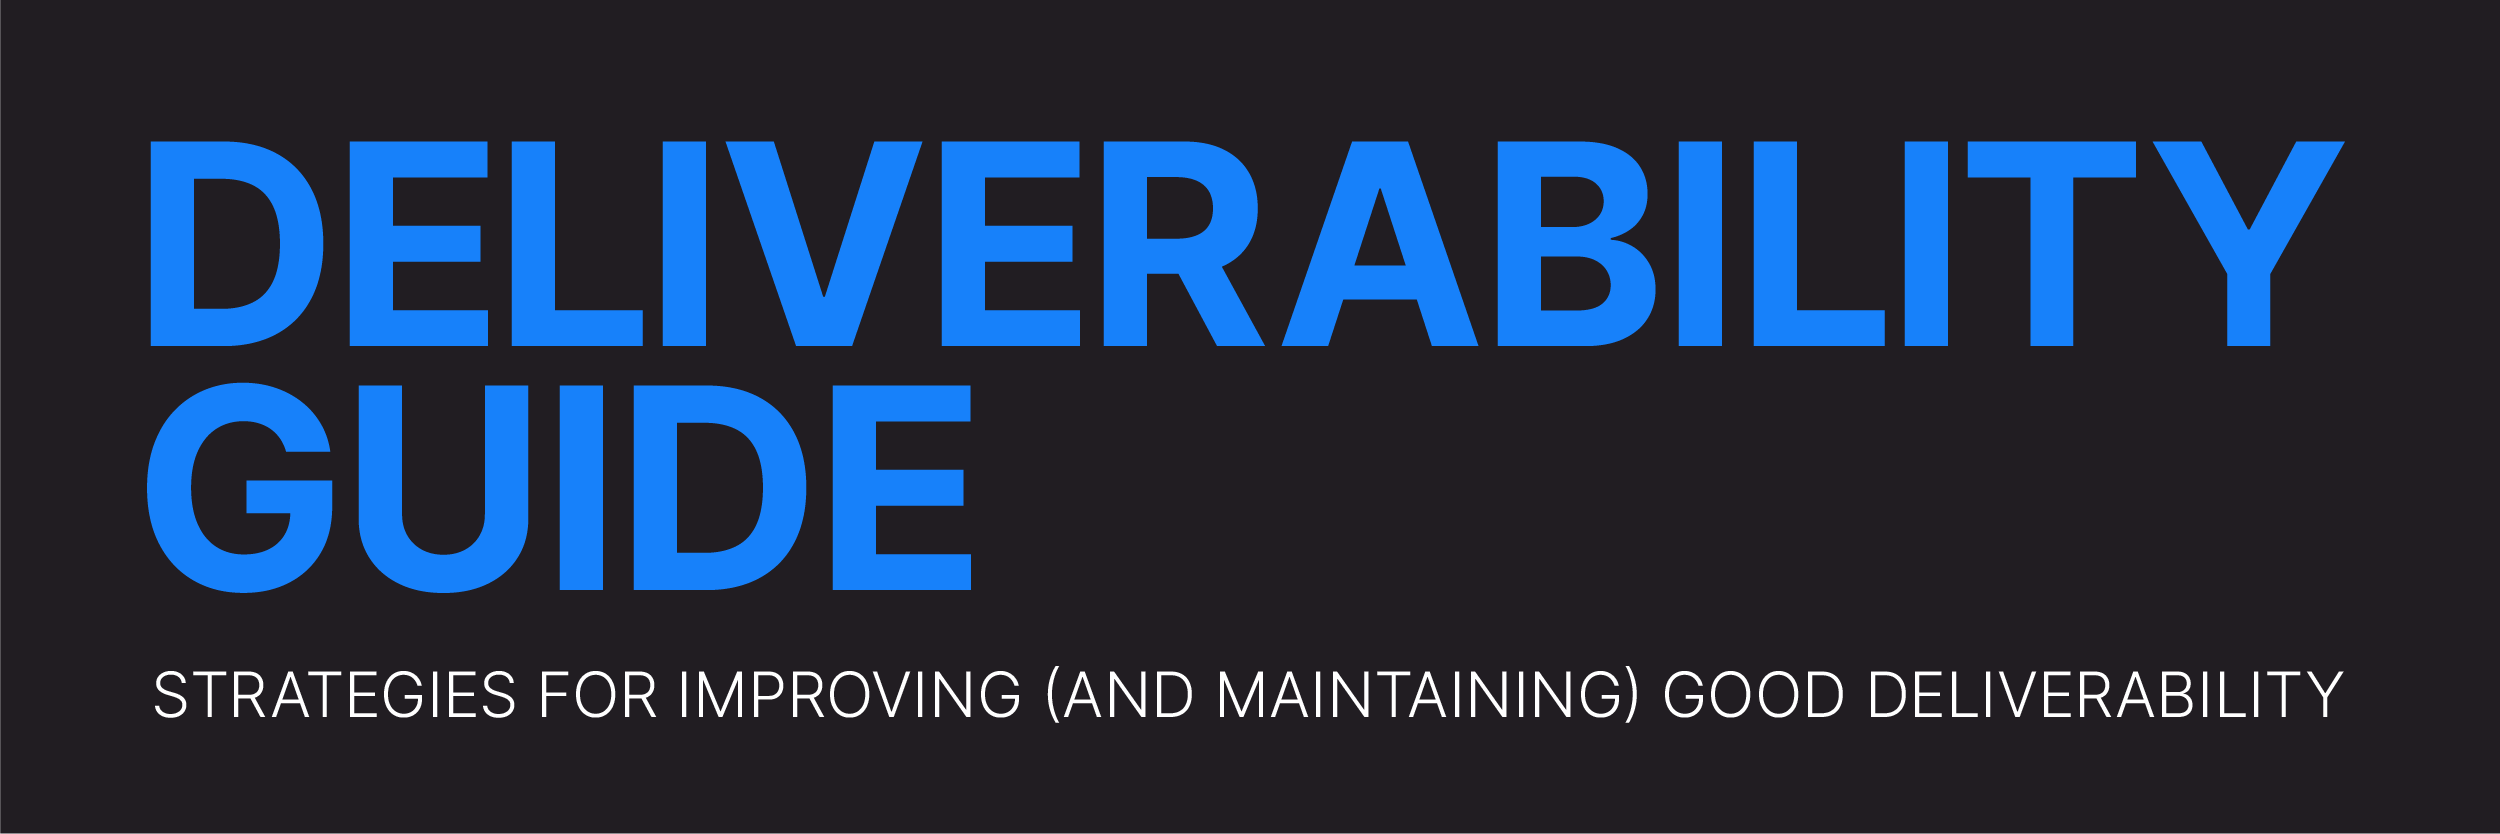 Deliverability Guide: Strategies for Improving (and Maintaining) Good Deliverability